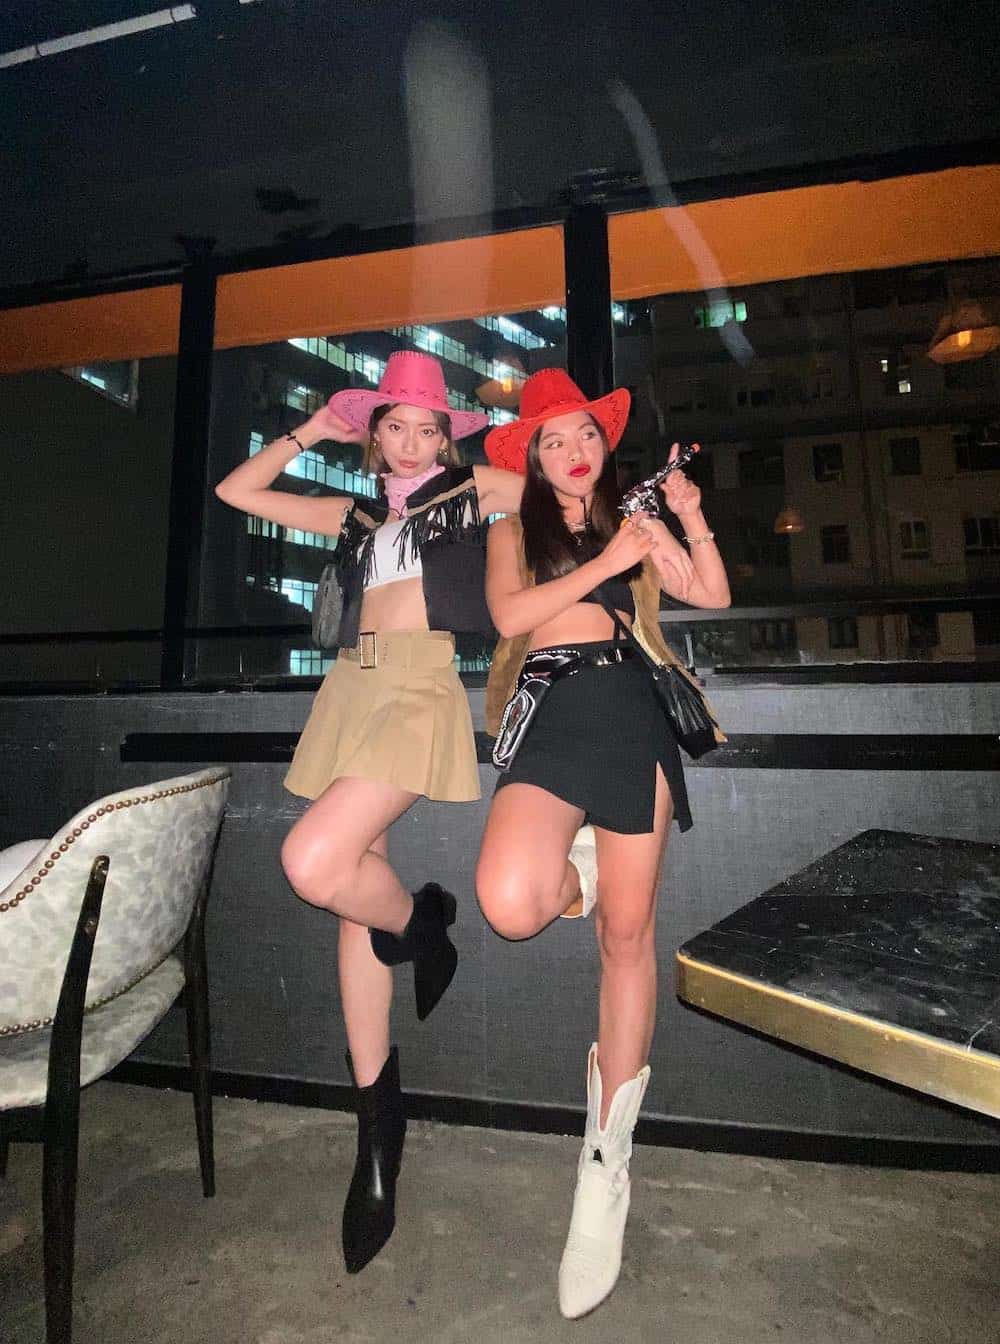 Two women dressed up as cowgirls on Halloween.